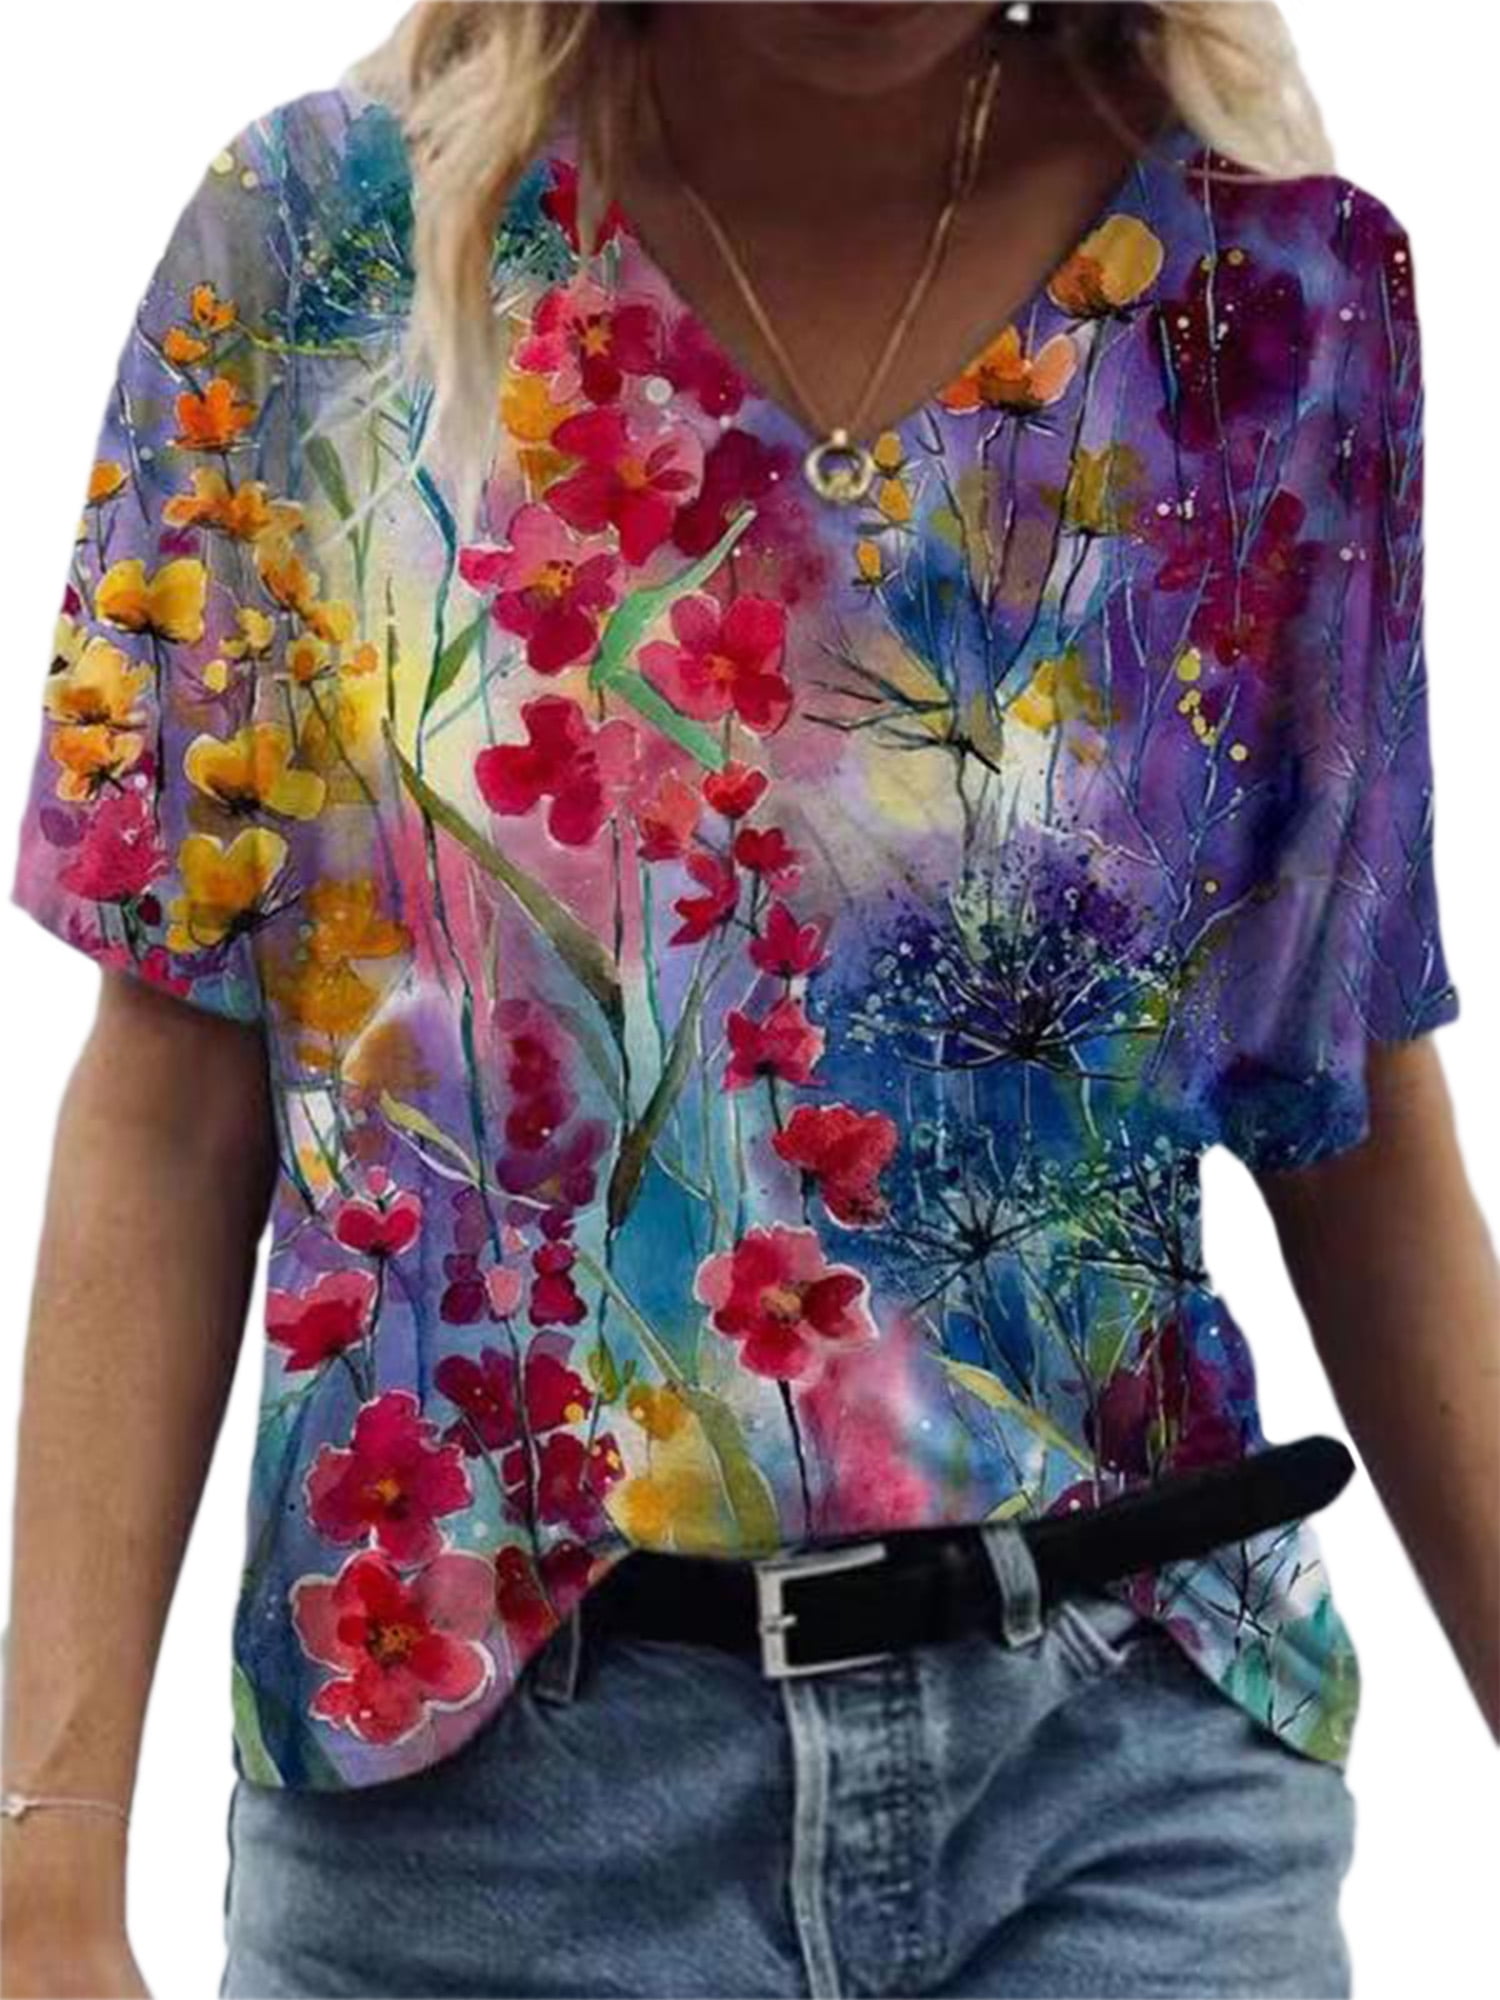 US Women Ladies Floral Pattern Short Sleeve Shirt Casual V Neck Blouse Tops 